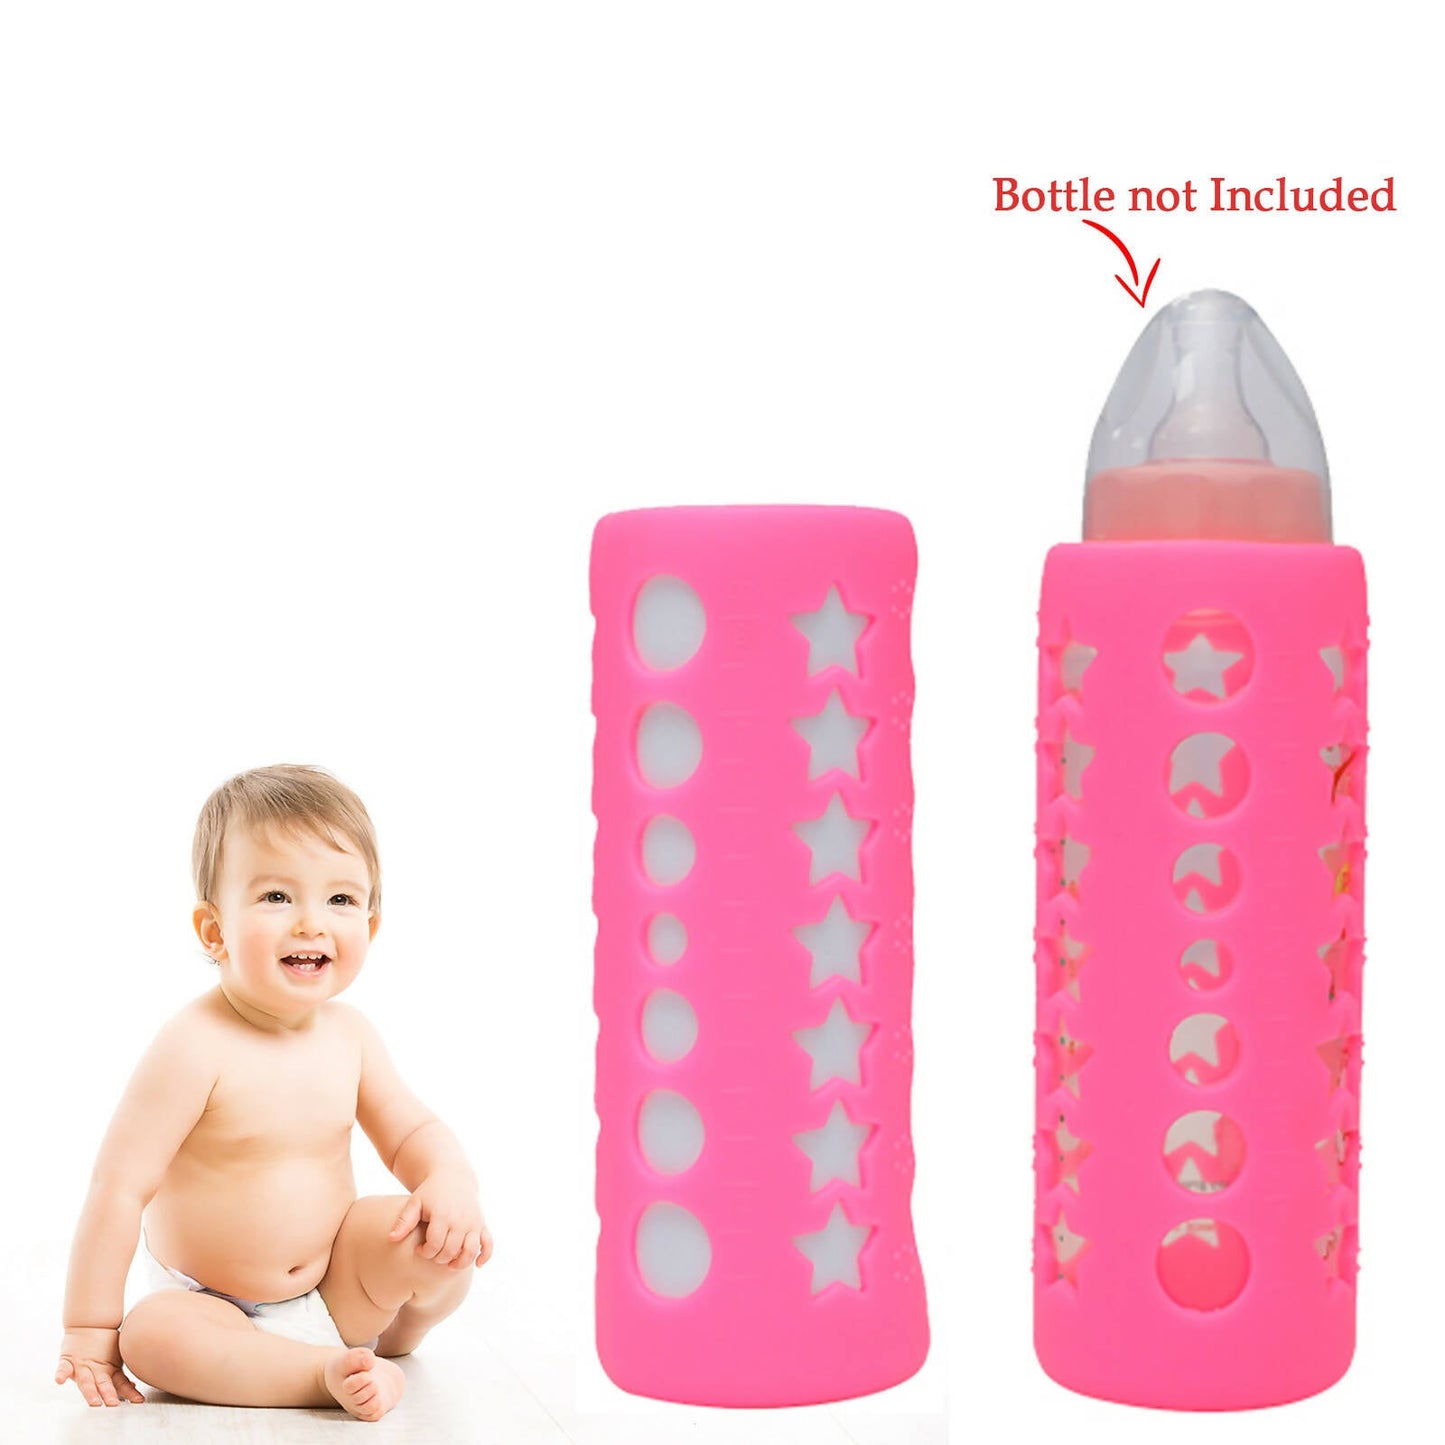 Safe-O-Kid Silicone Baby Feeding Bottle Cover Cum Sleeve for Insulated Protection 250mL- Pink